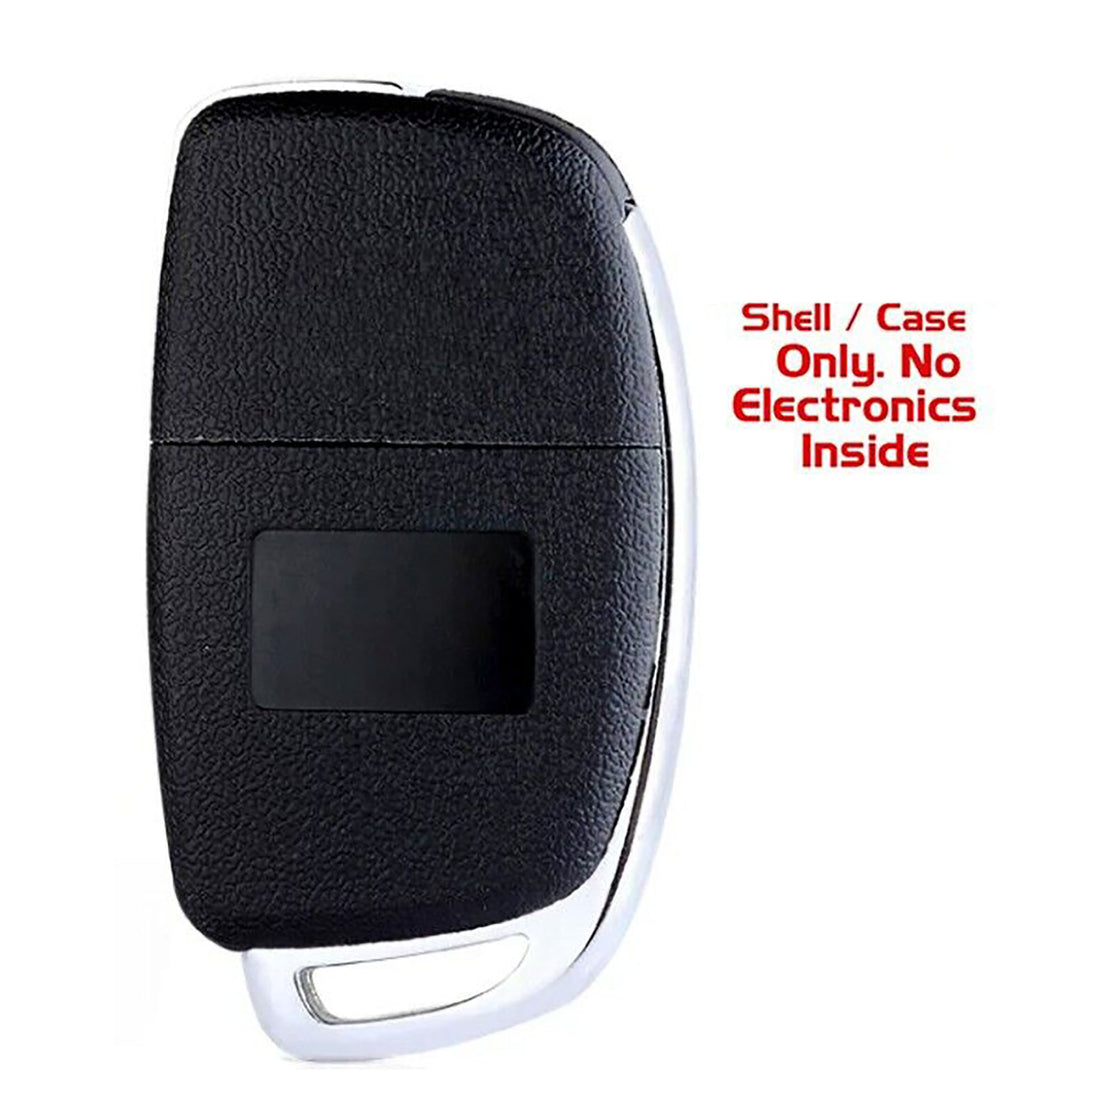 1x New Replacement Key Fob Remote SHELL / CASE Compatible with & Fit For 2013-2019 Hyundai Santa Fe - MPN TQ8-RKE-3F04-04 (NO electronics or Chip inside)